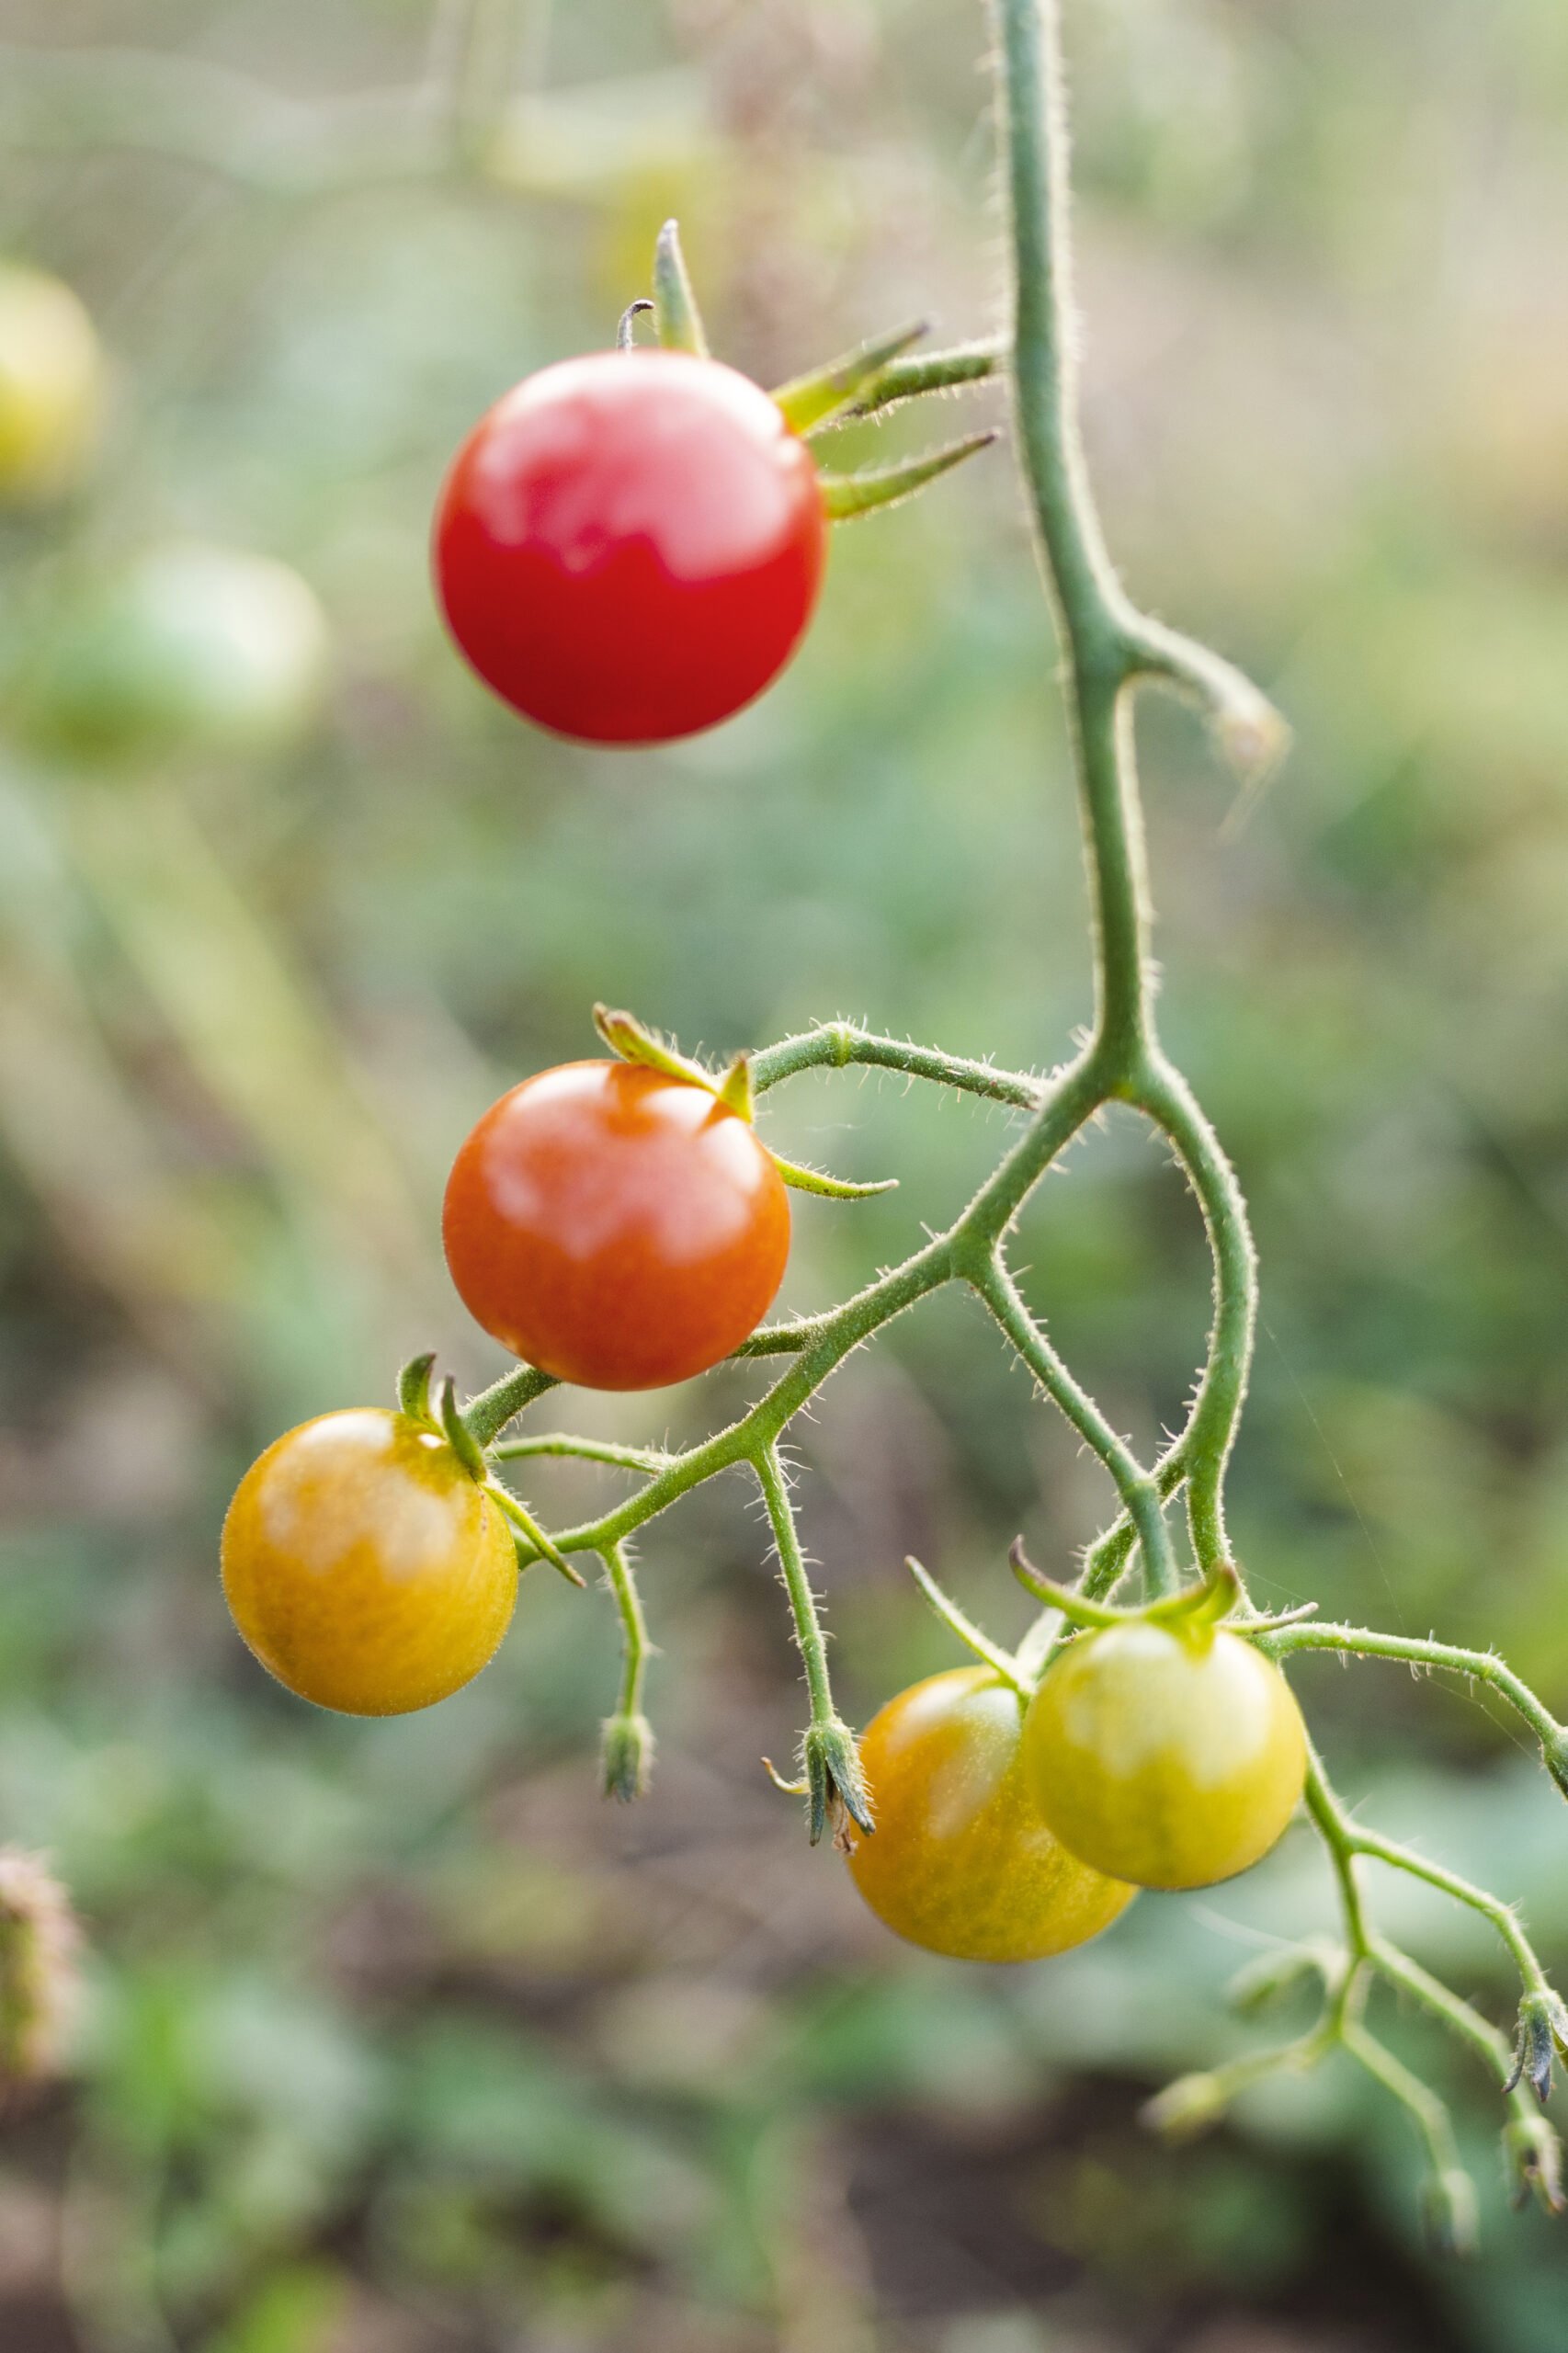 How to Harvest Tomatoes in the Fall